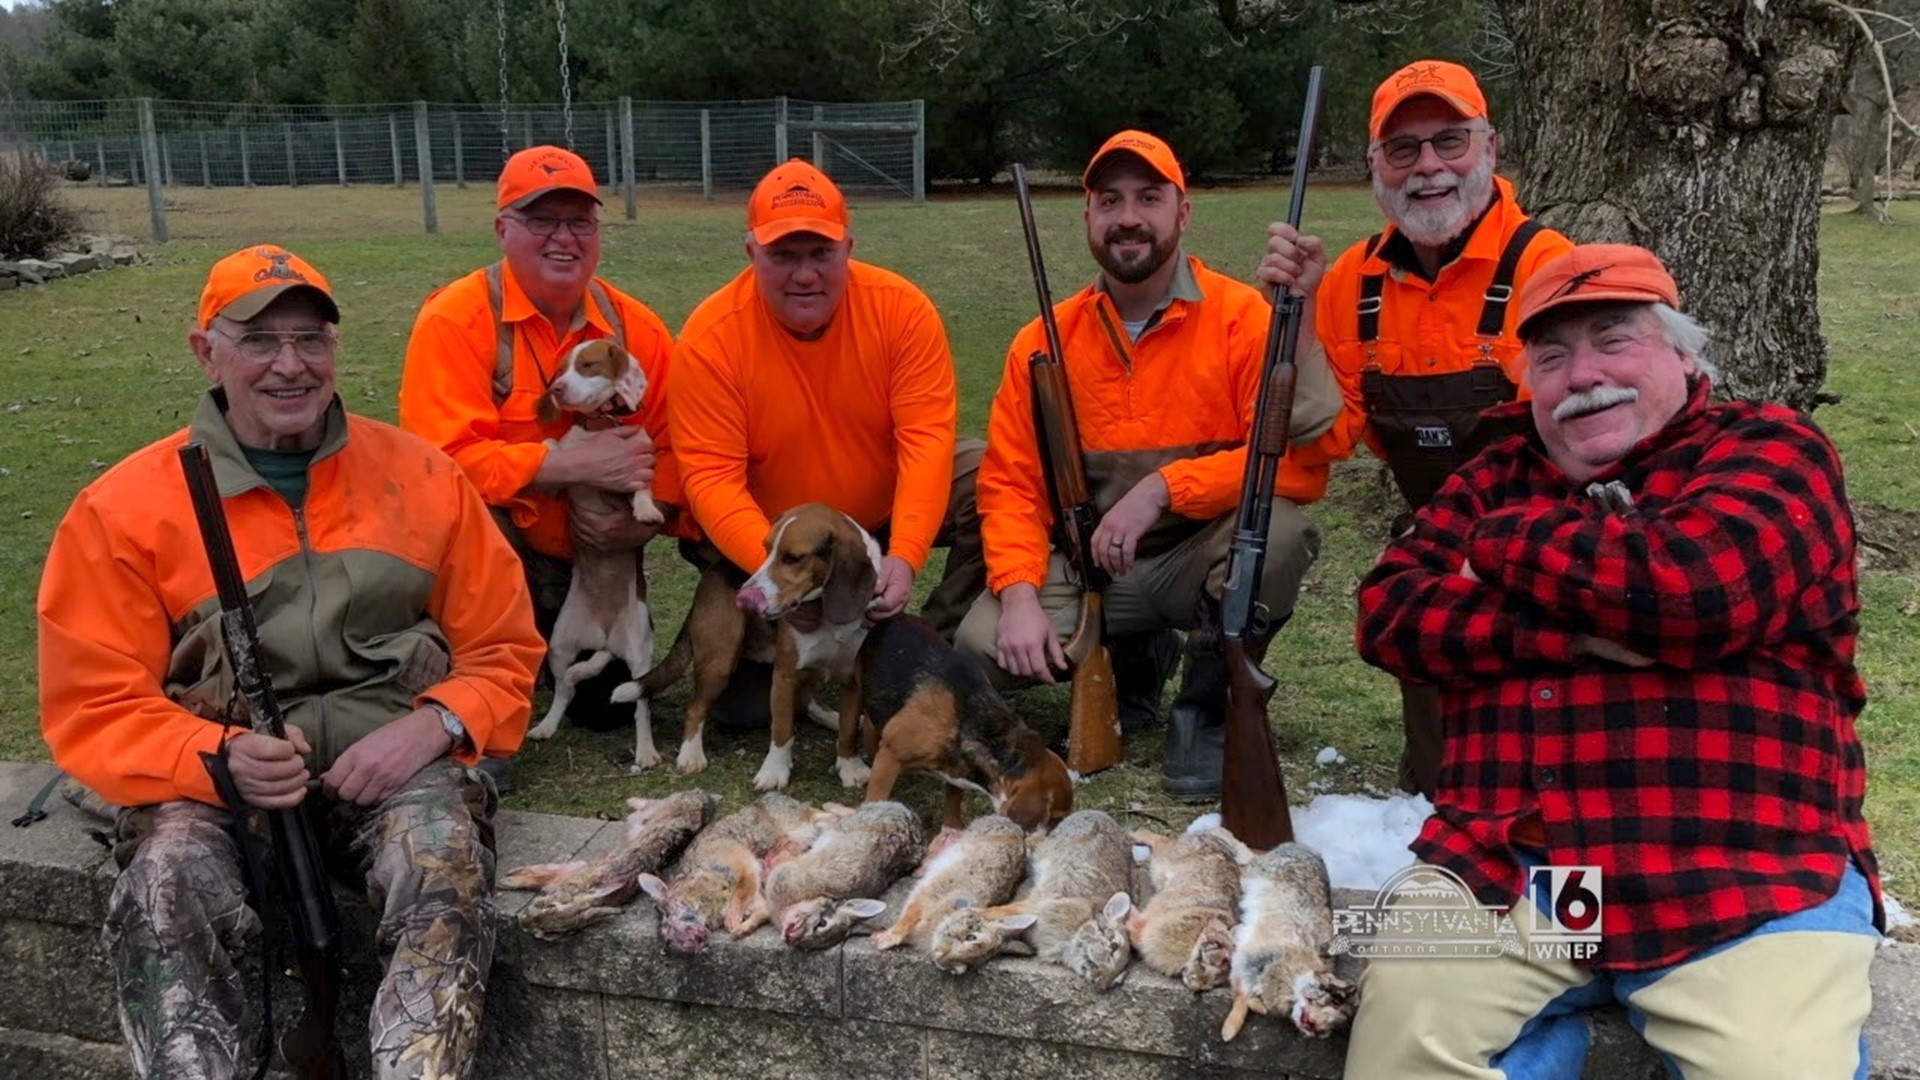 We're continuing our Schuylkill County late season rabbit hunt.